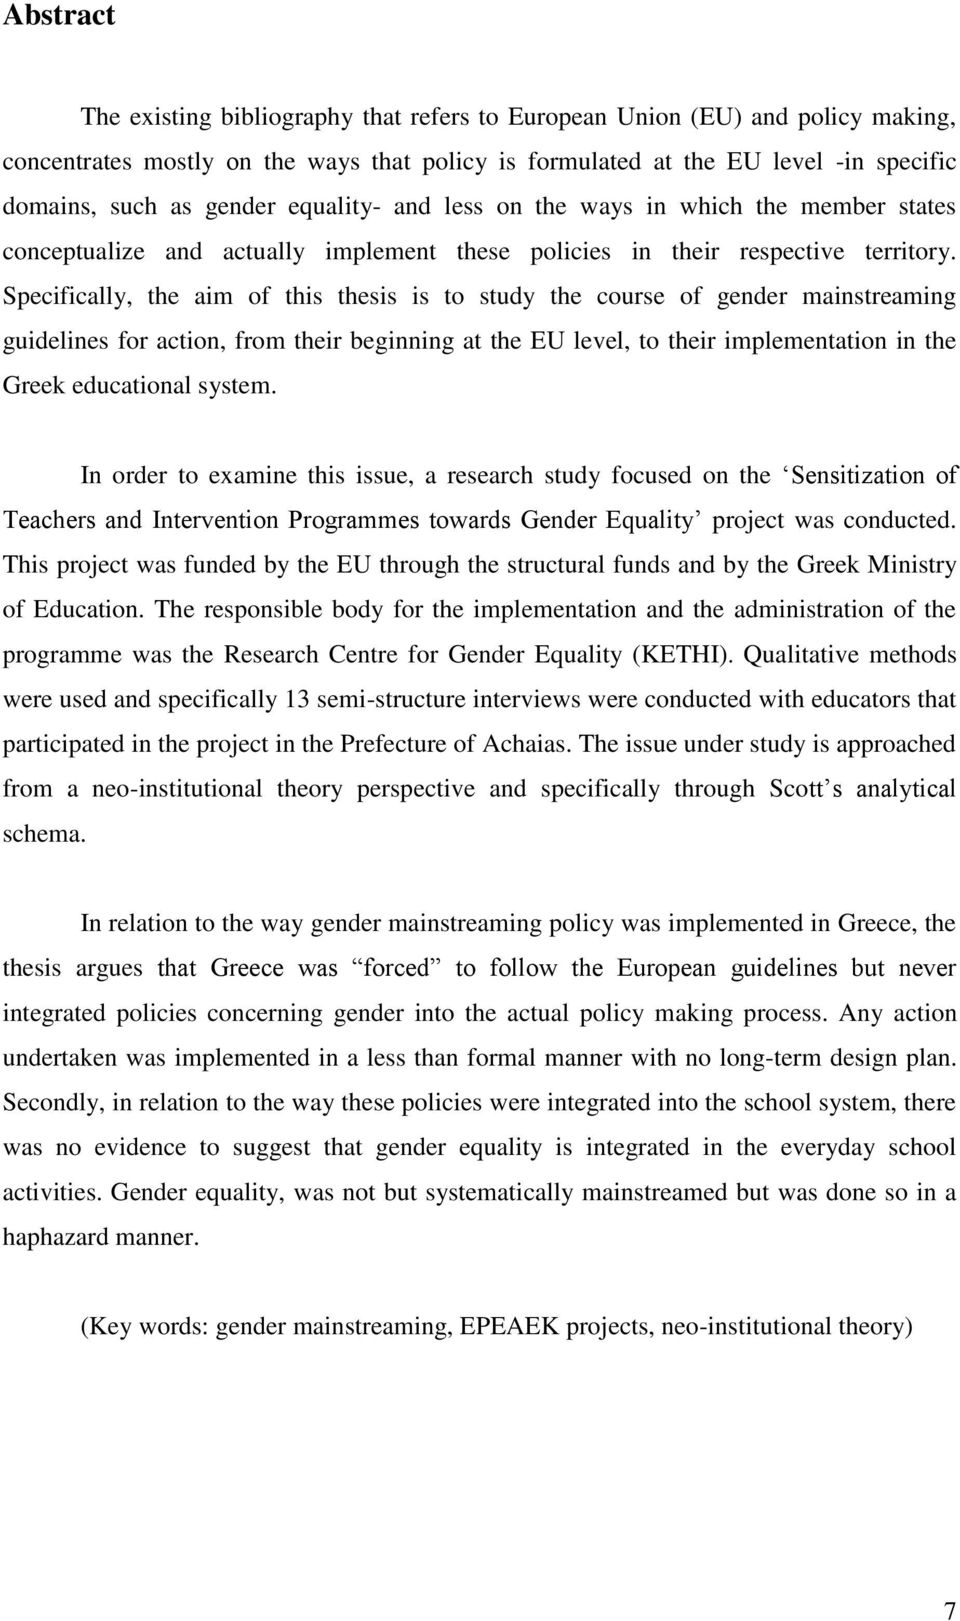 Specifically, the aim of this thesis is to study the course of gender mainstreaming guidelines for action, from their beginning at the EU level, to their implementation in the Greek educational